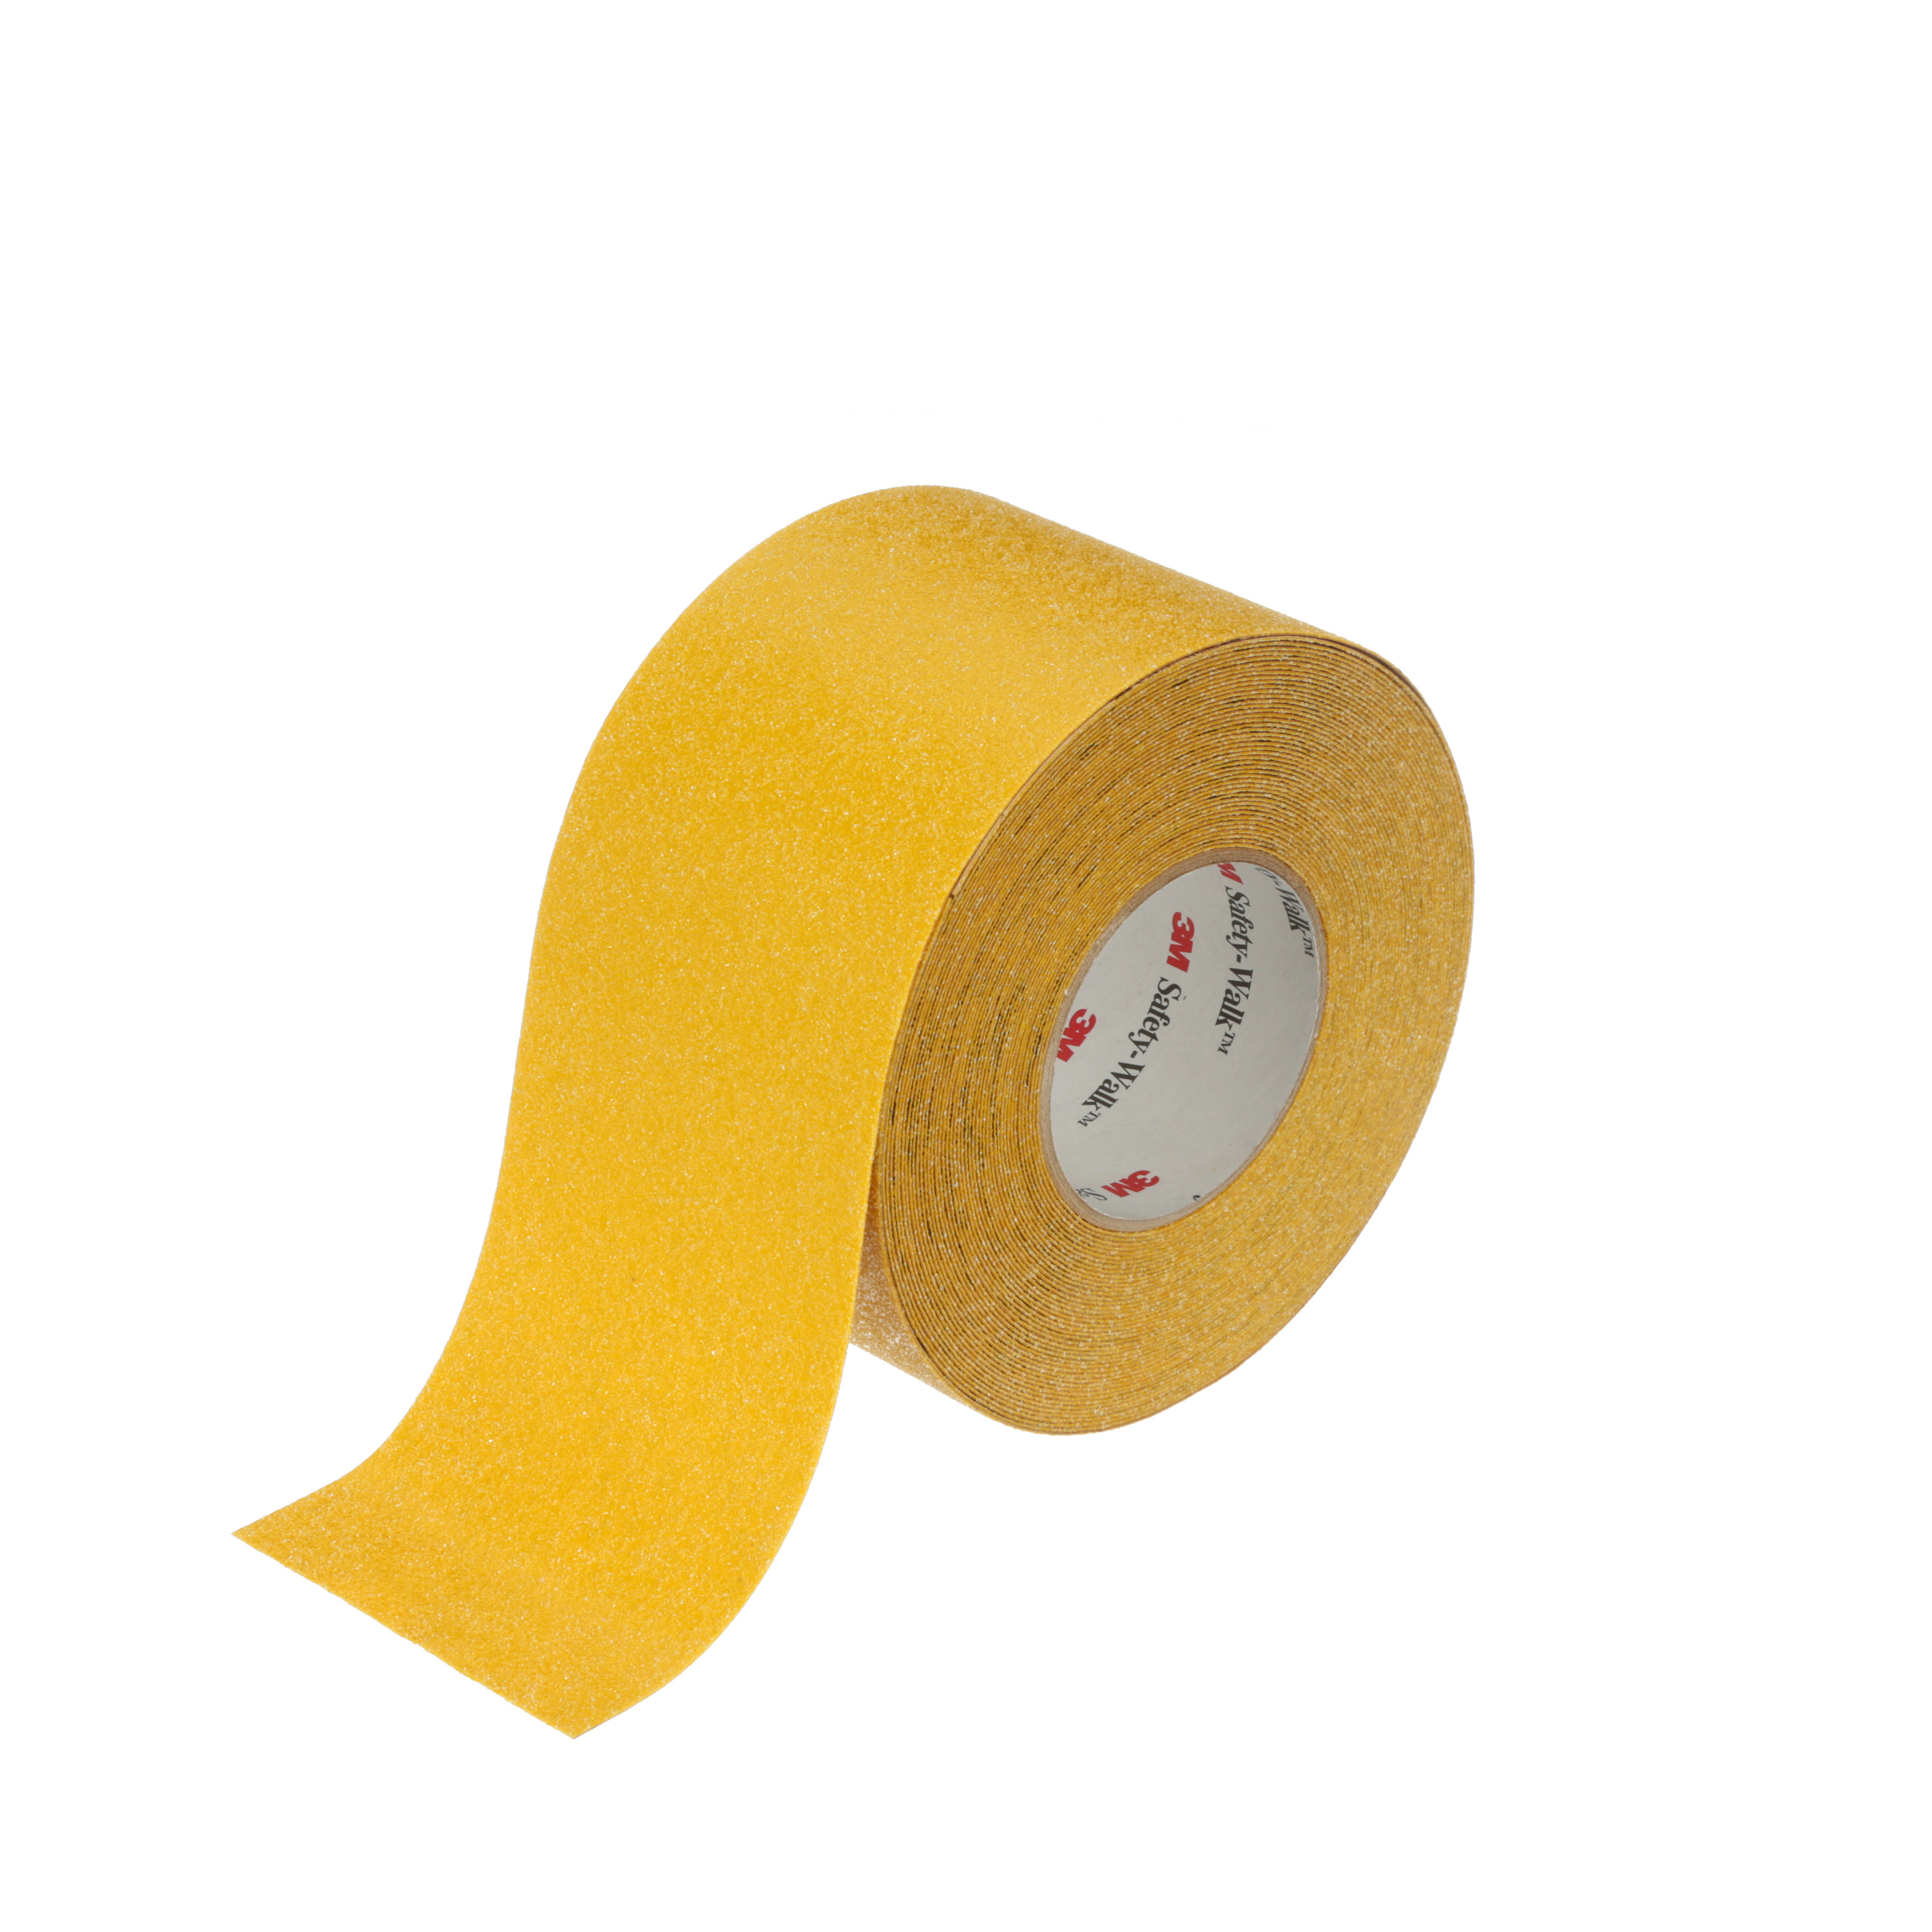 3M™ Safety-Walk™ Slip-Resistant General Purpose Tapes & Treads 630,
Safety Yellow, 2 inch Wide & Over, Configurable Roll